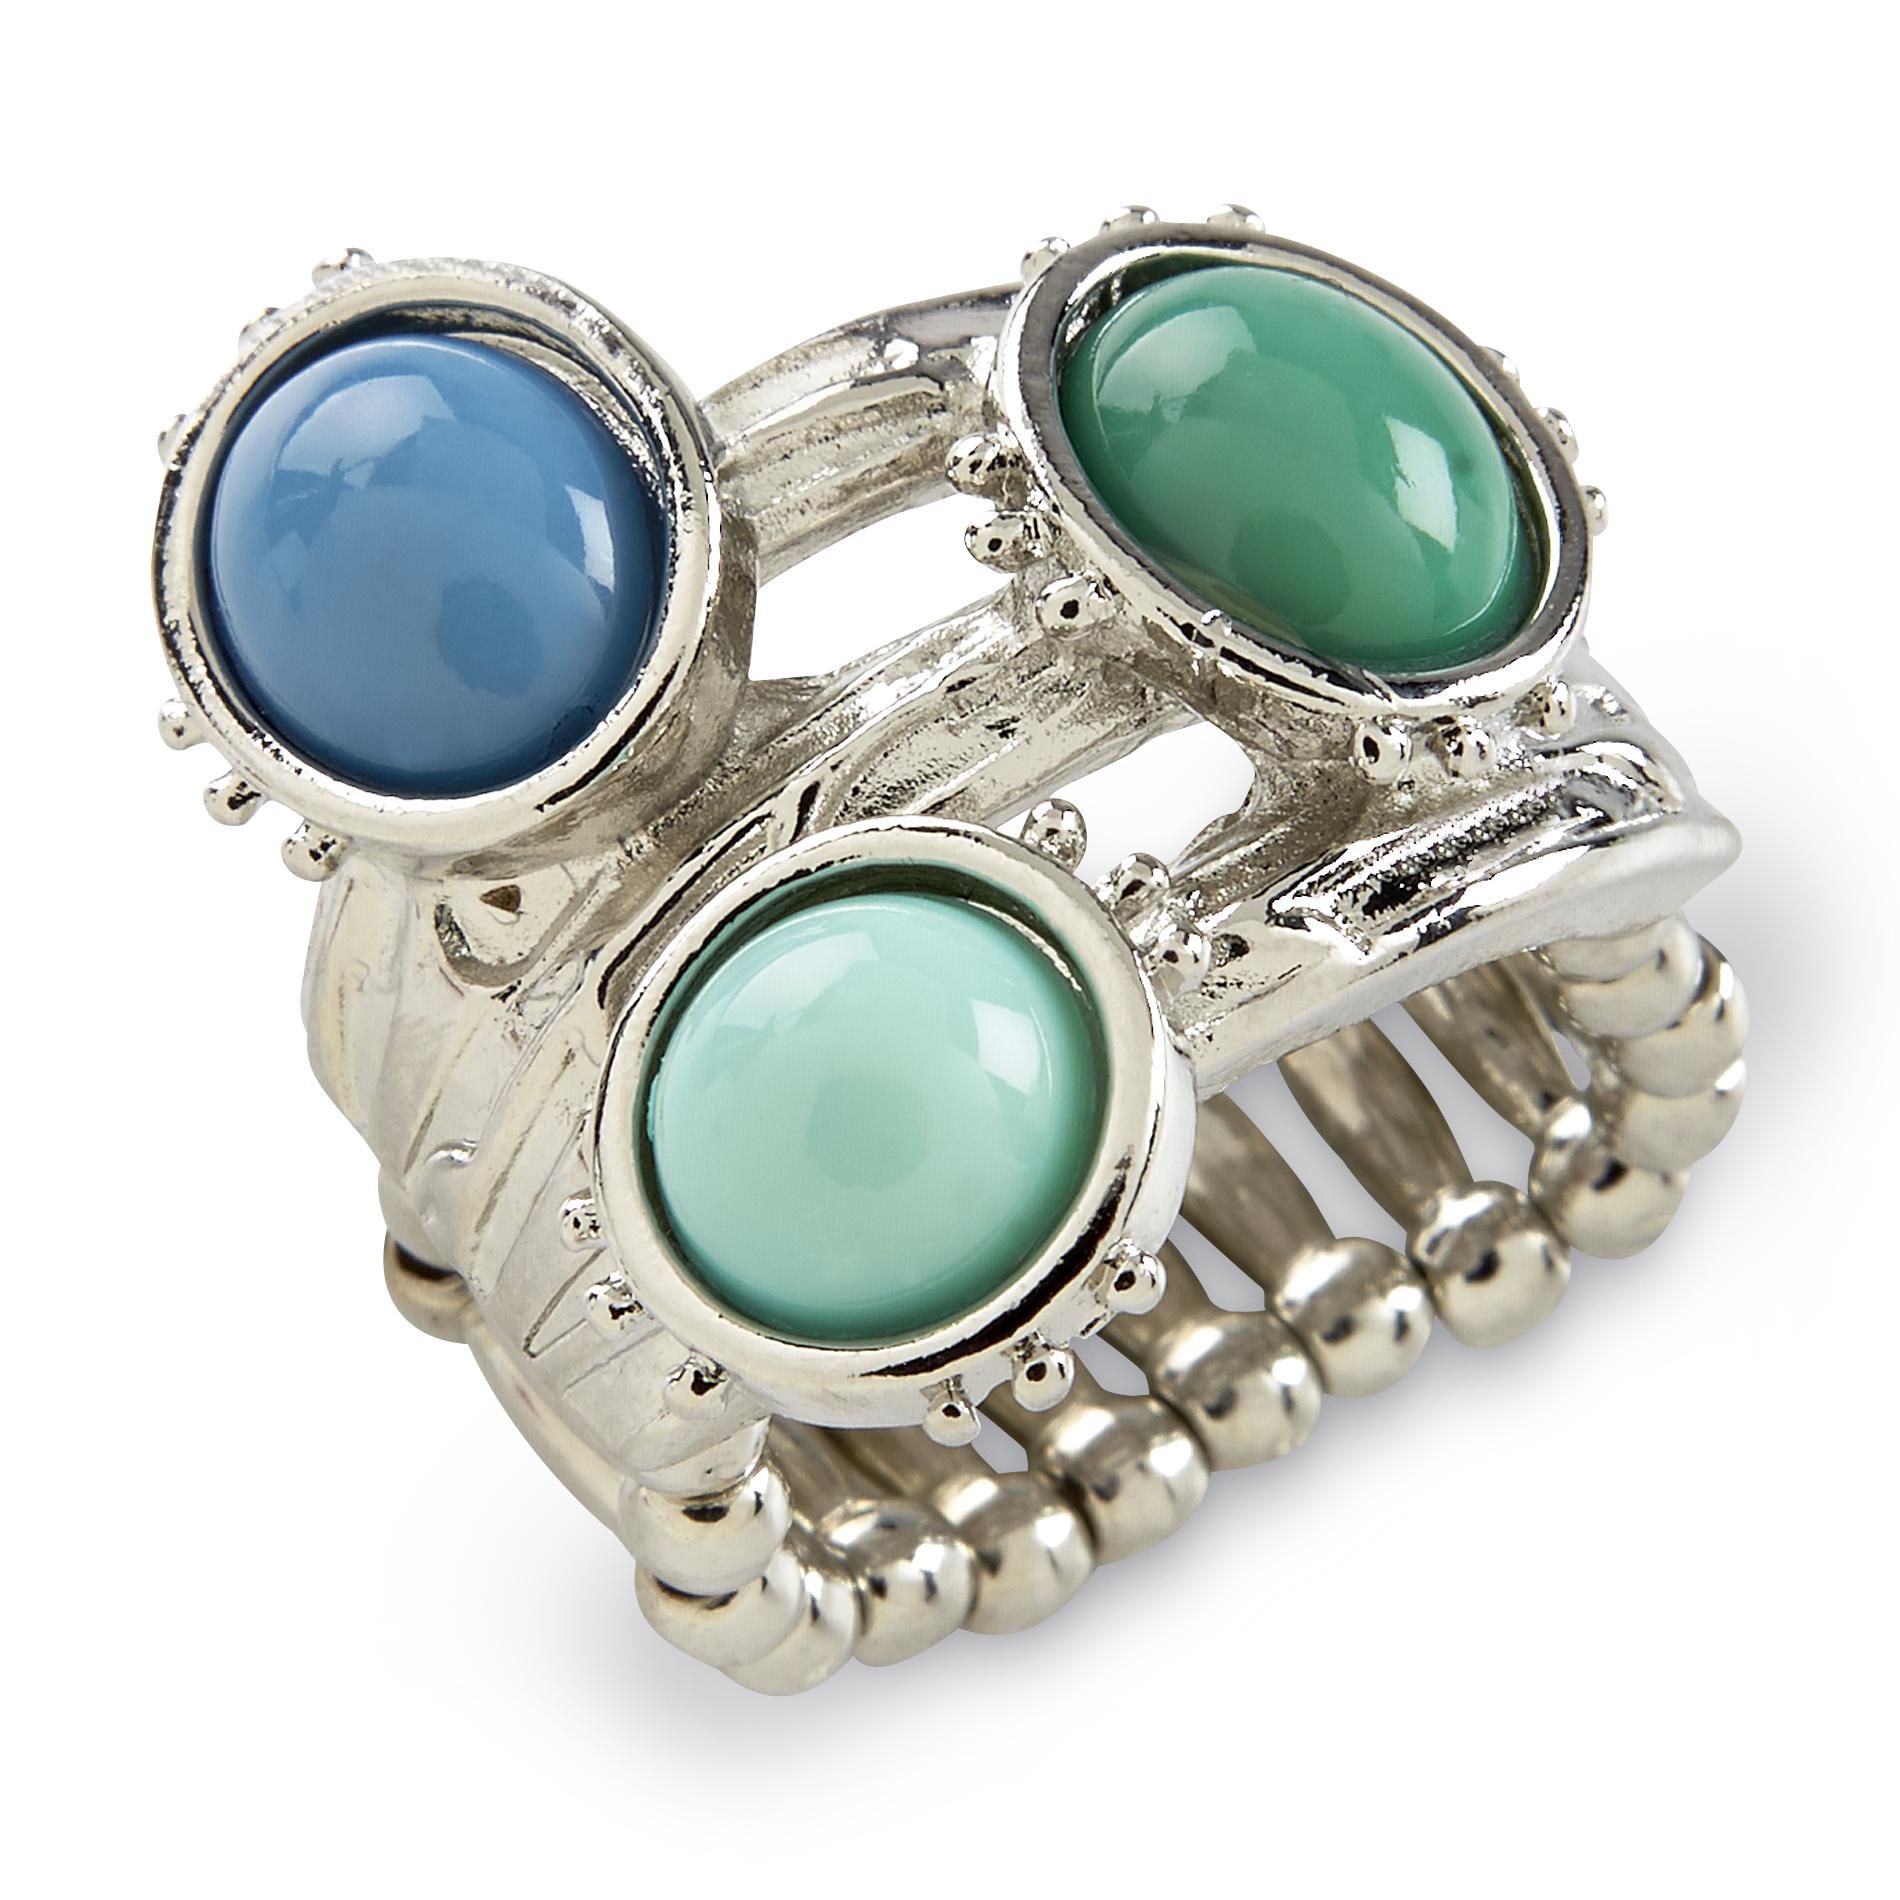 Junior's Silvertone Stretch Ring - Turquoise Combo